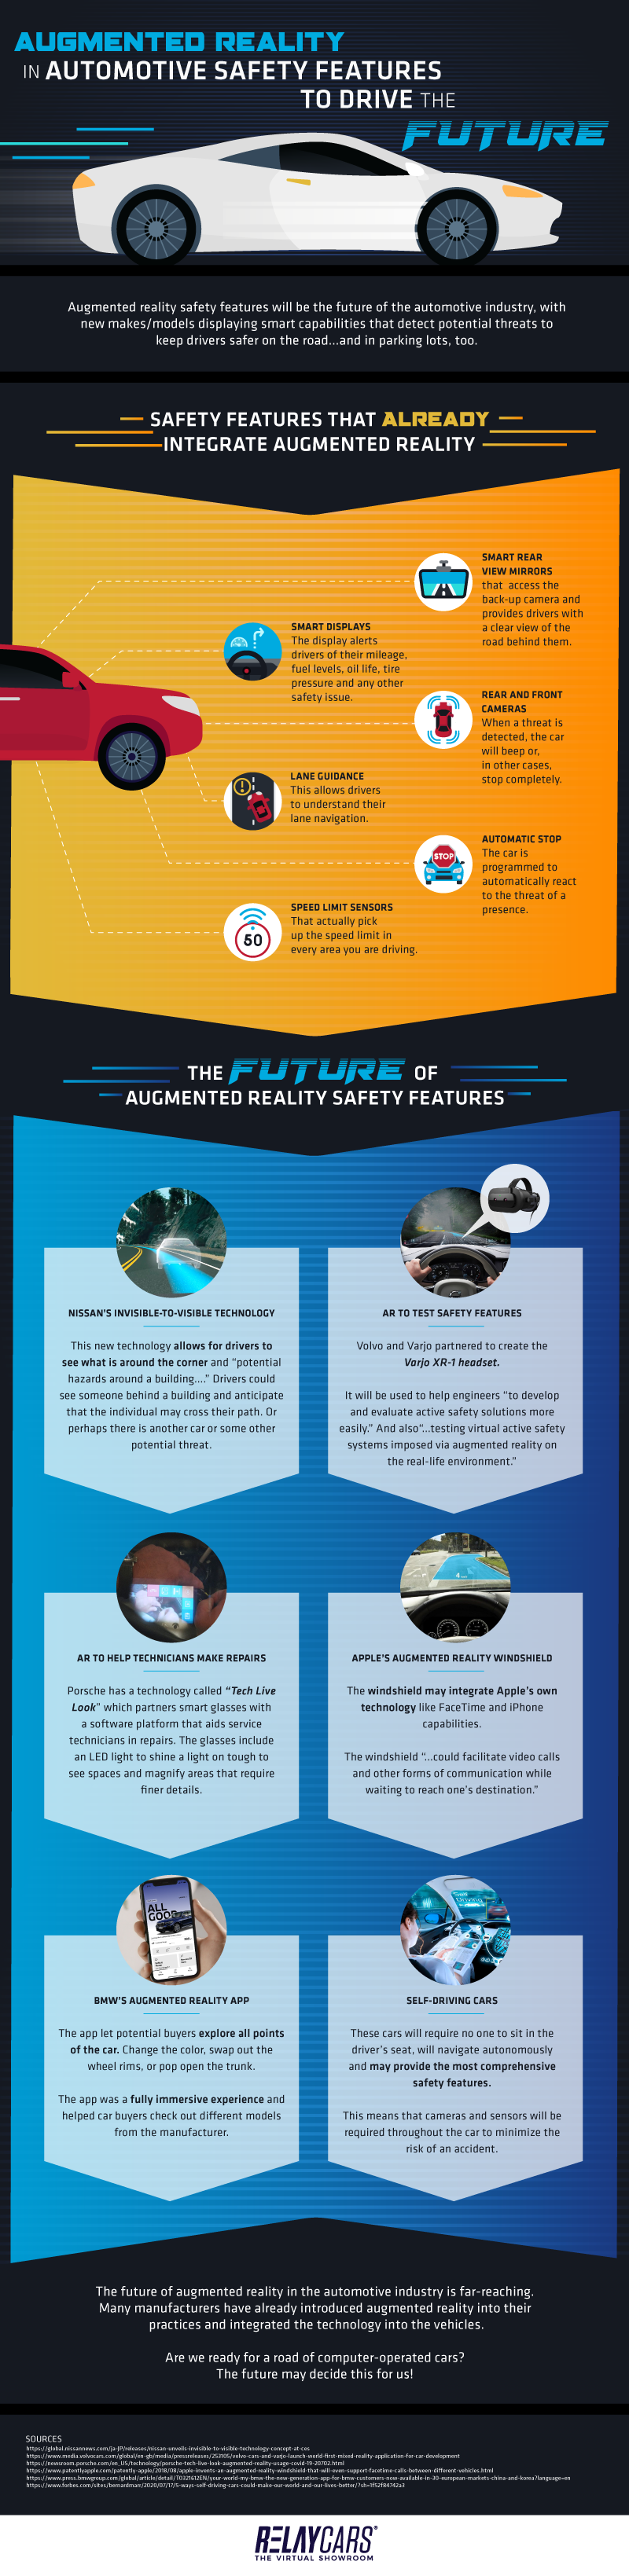 Augmented Reality in Automotive